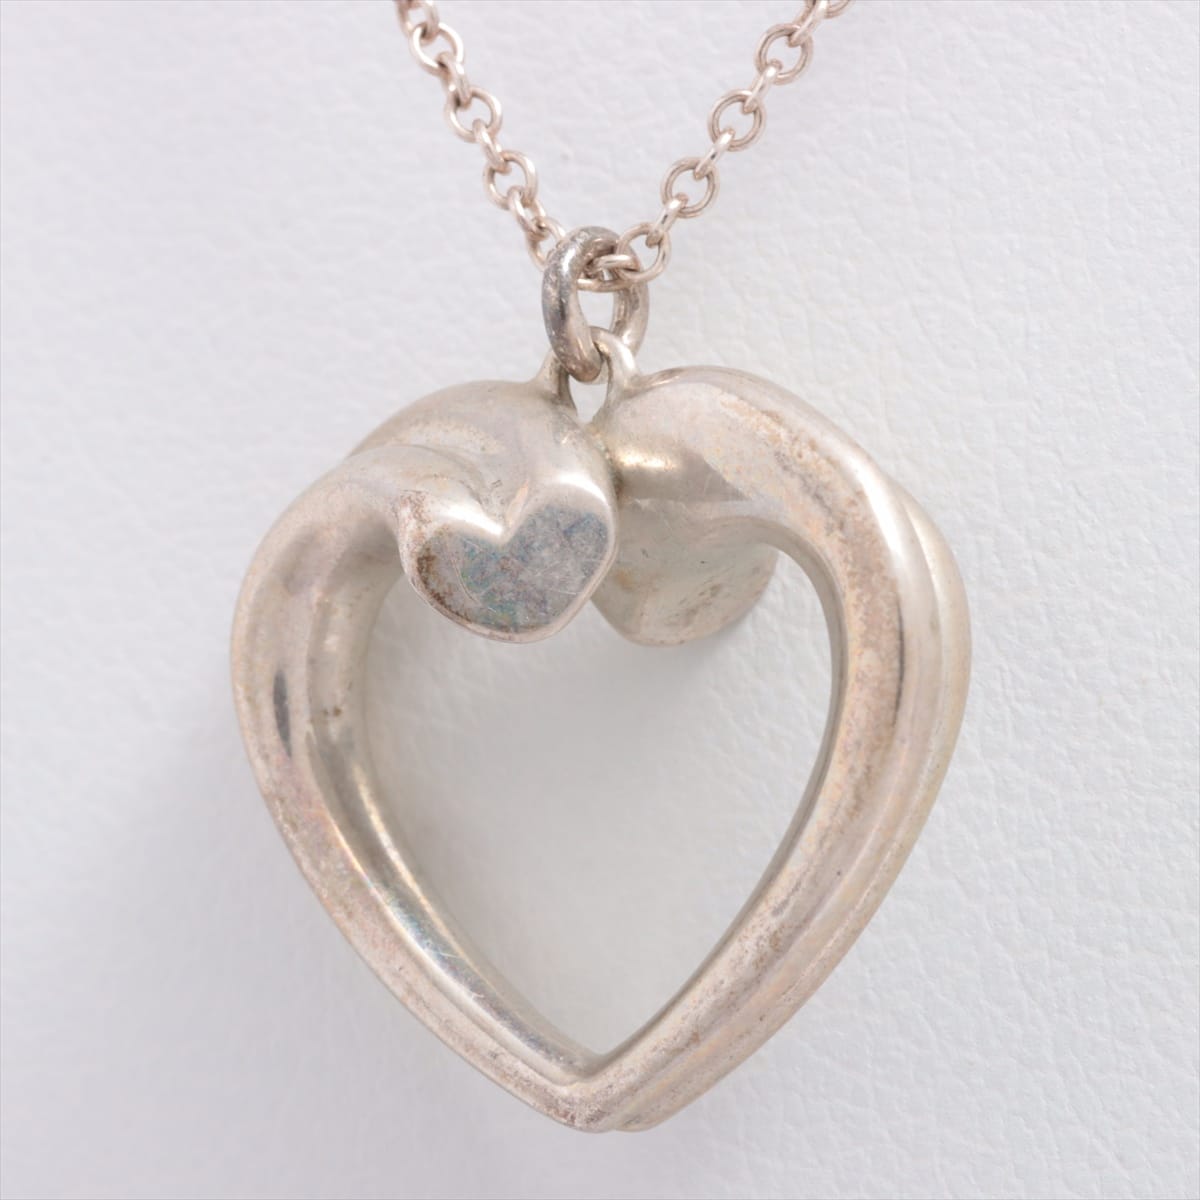 Tiffany Tenderness Heart Necklace 925 4.0g Silver